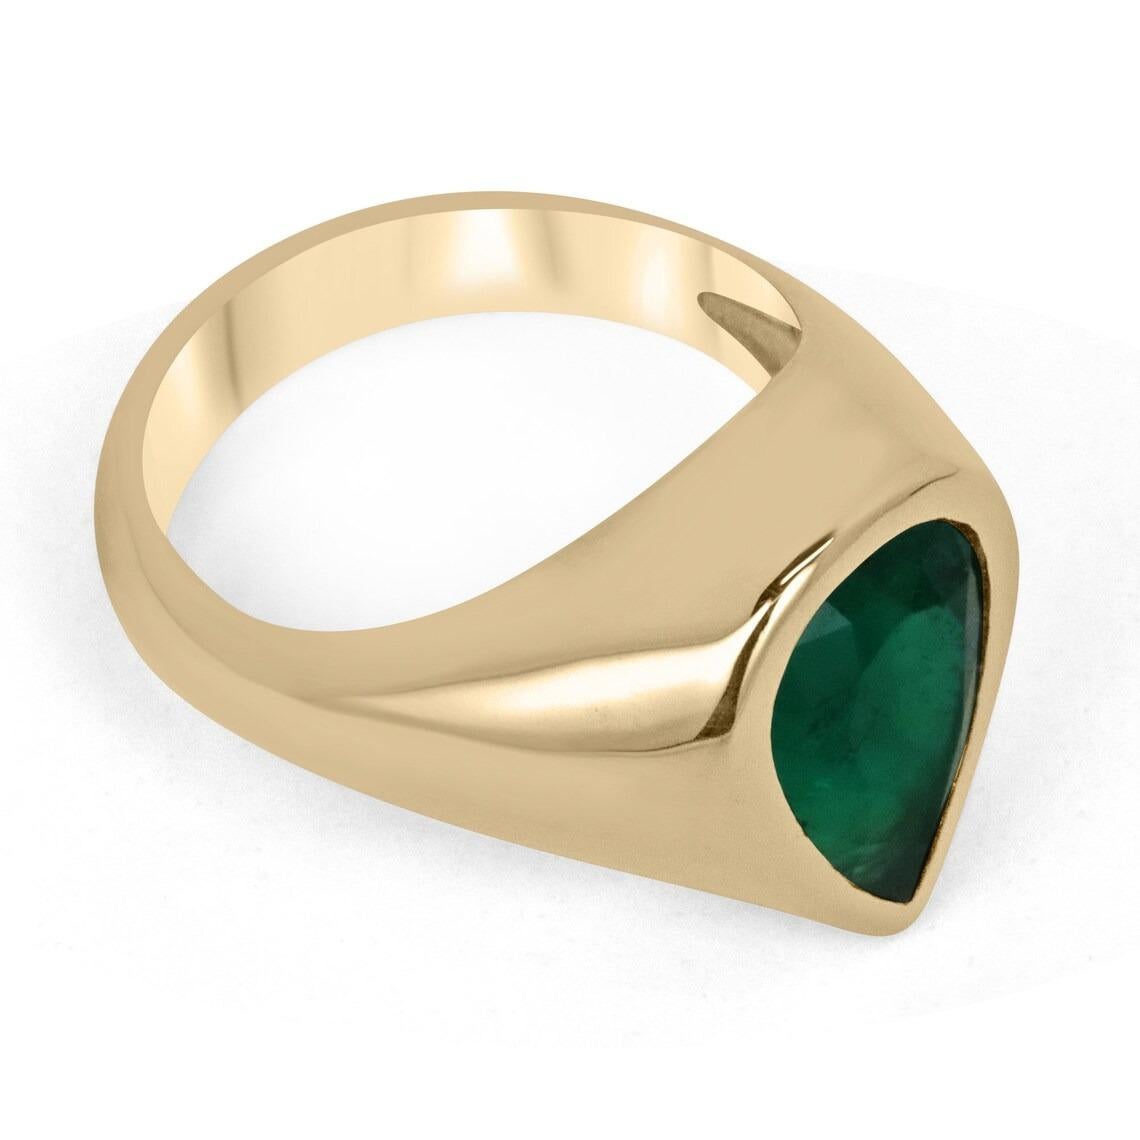 Displayed is a stunning, AAA+ top-of-the-line 3.55-carat Colombian emerald teardrop gypsy ring in 18K yellow gold. This gorgeous solitaire ring carries a natural emerald in a bezel setting. Fully faceted, this gemstone showcases very good shine and